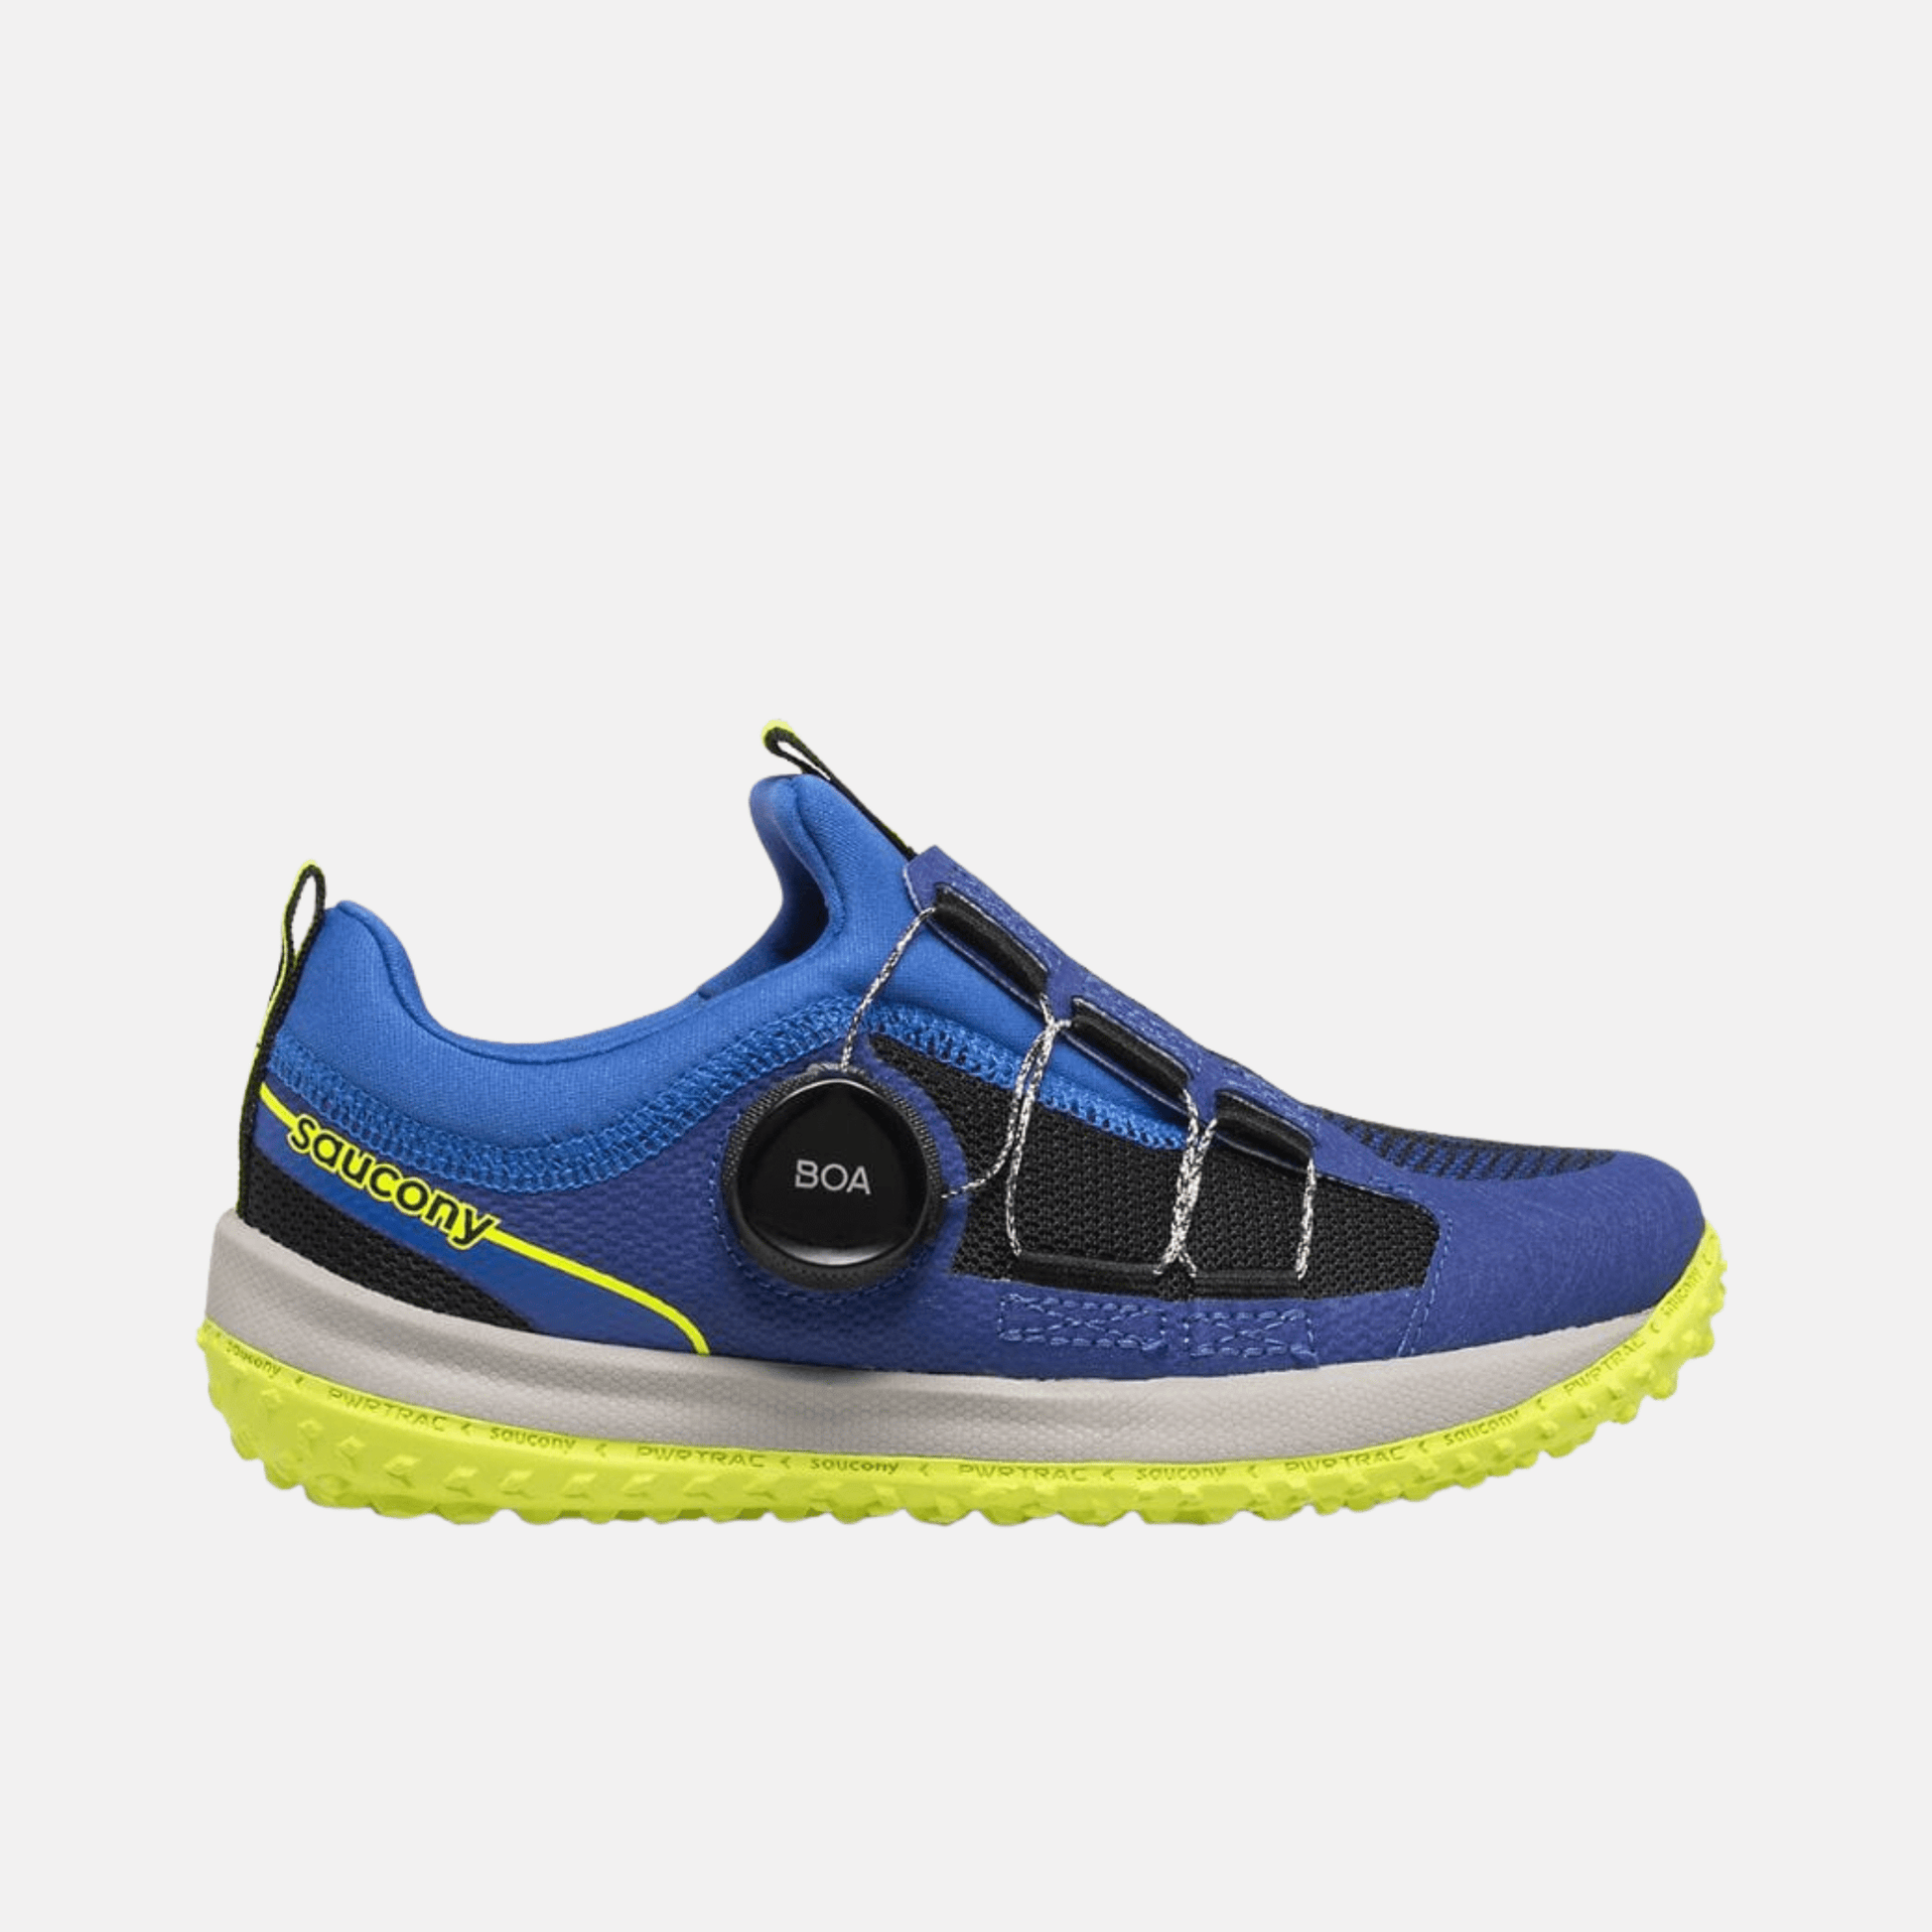 Saucony Runners Saucony Switchback 2.0 Blue/Citro